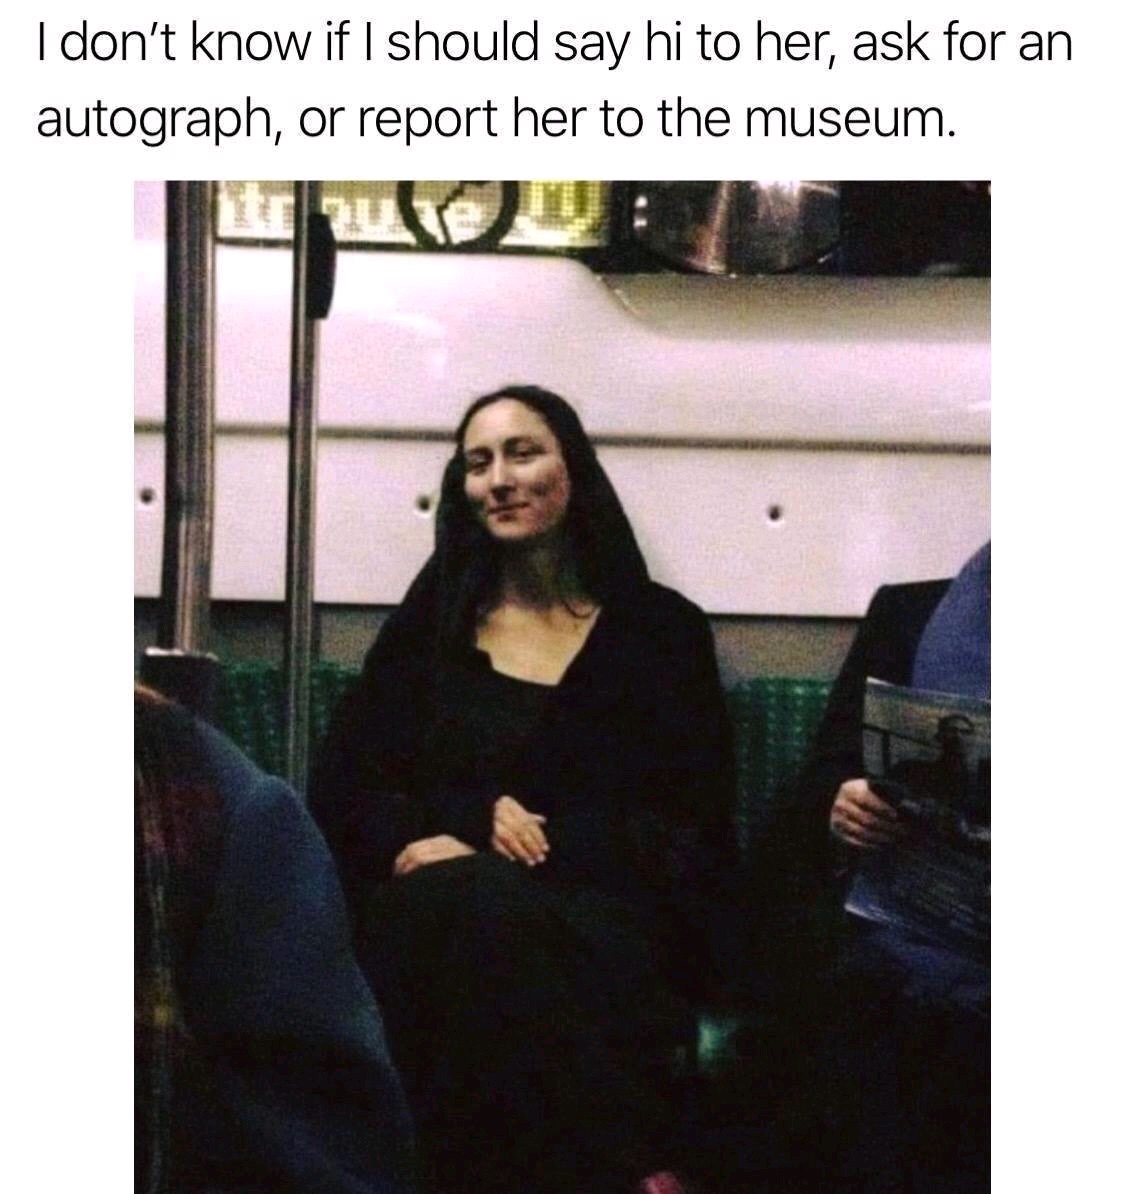 hilarious memes funny - I don't know if I should say hi to her, ask for an autograph, or report her to the museum.